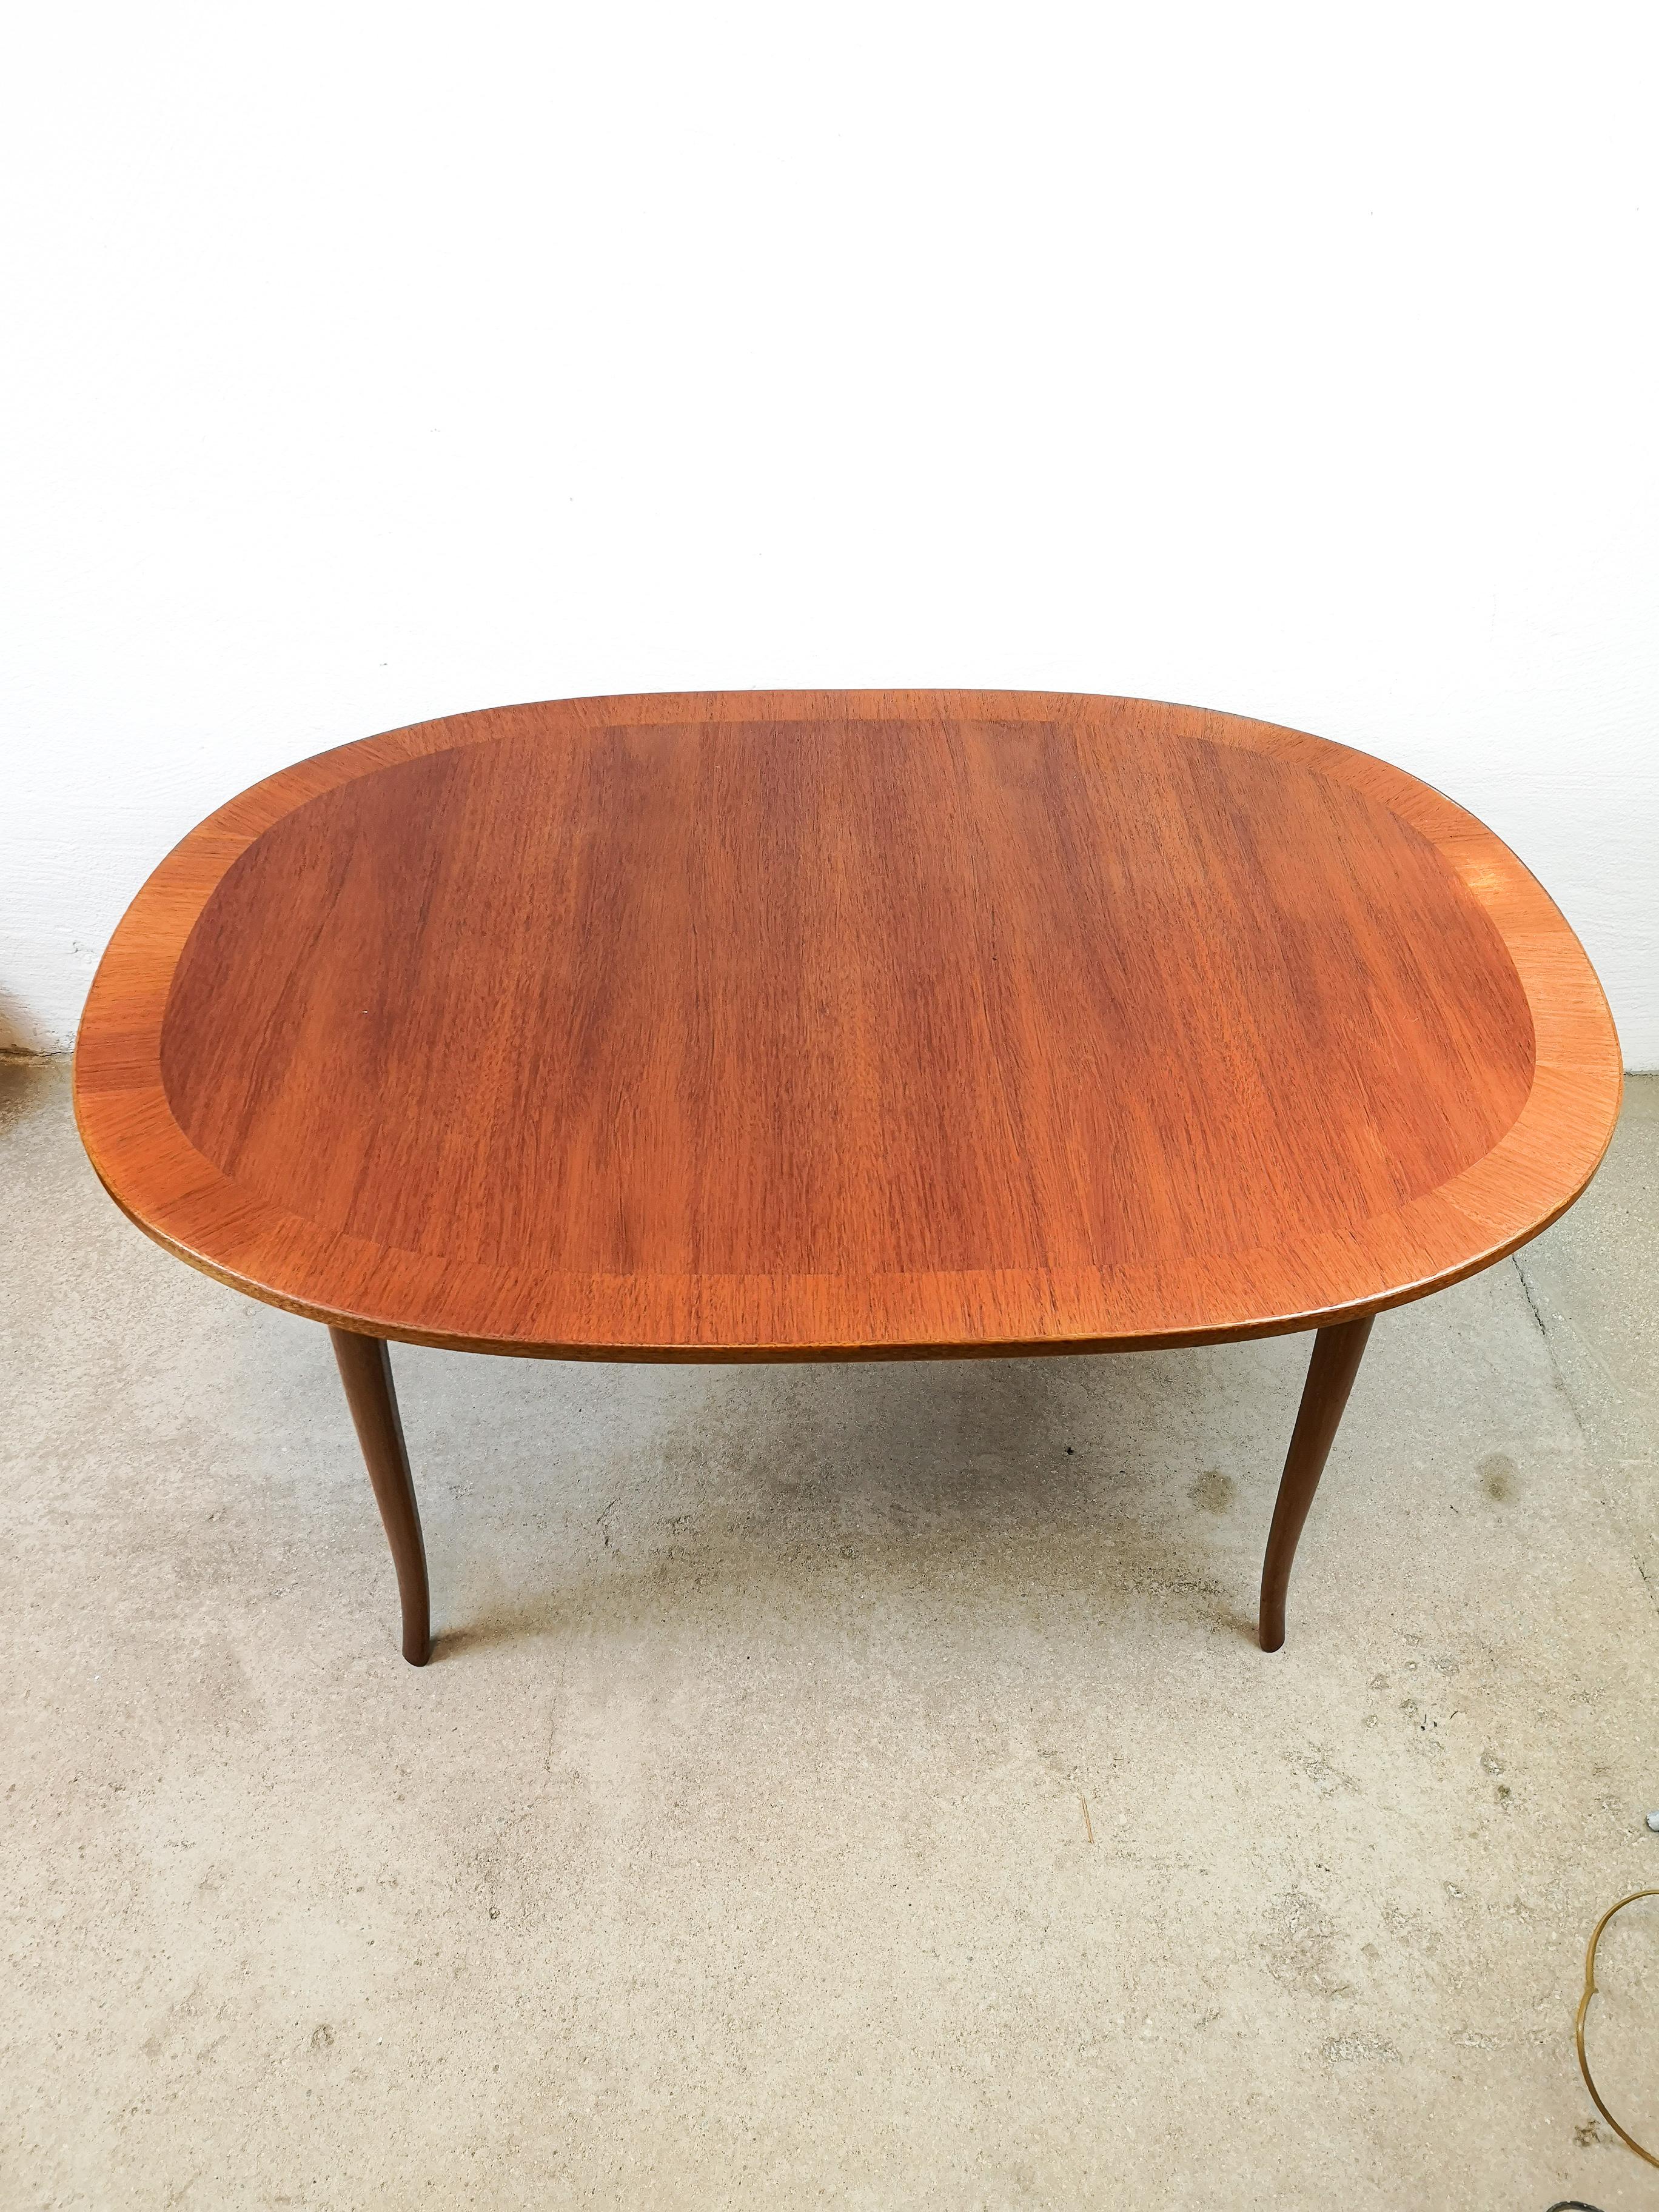 An oval teak coffee table of the model 